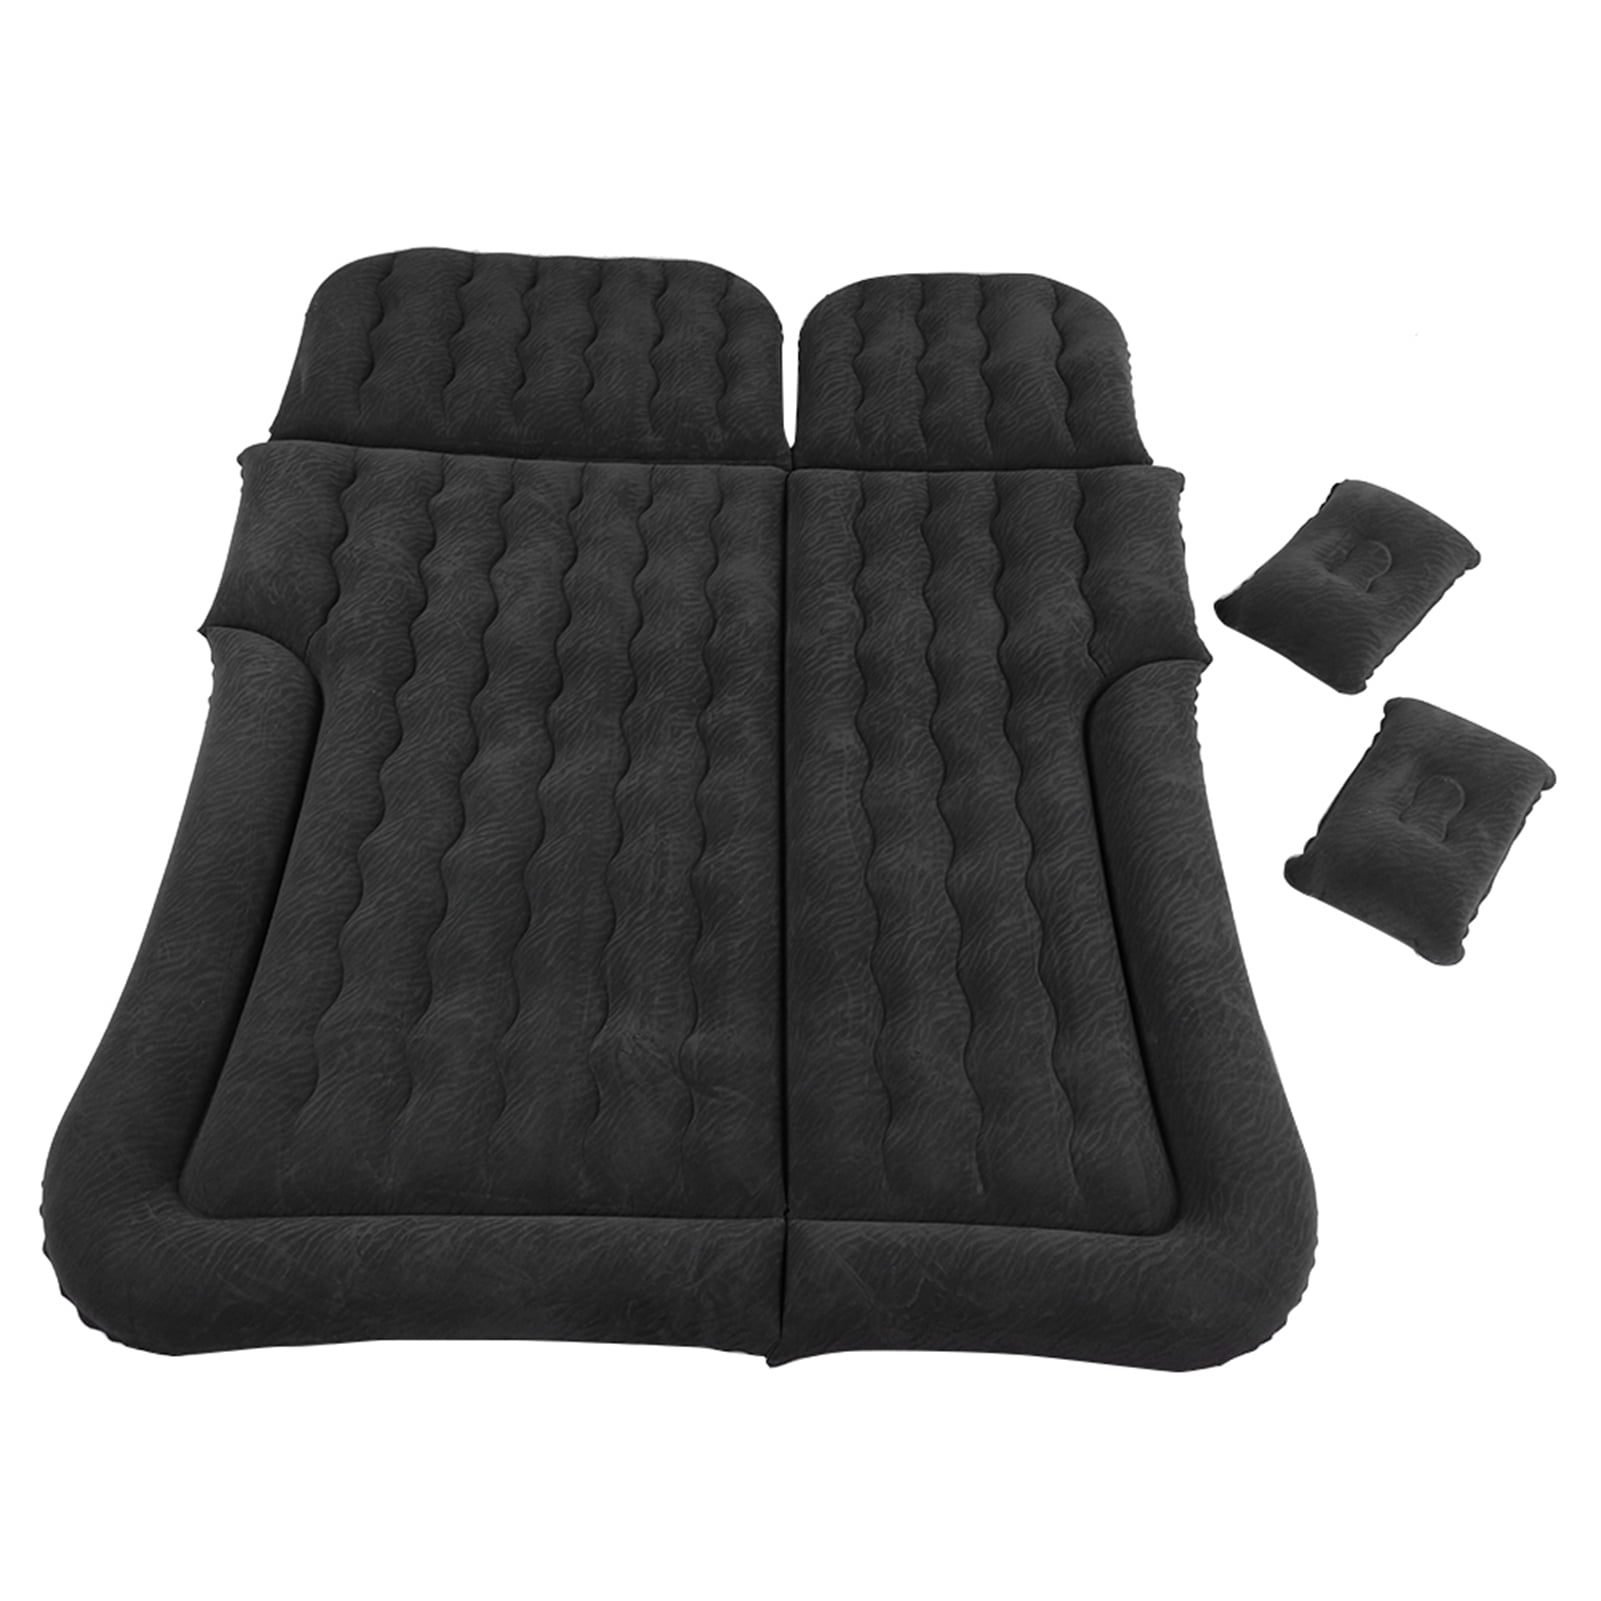 Aramox Car Inflatable Bed, 2‑In‑1 Multifunction Inflatable Travel Mattress PVC Flocking Soft Sleeping Rest Cushion for Car SUV Walmart.com